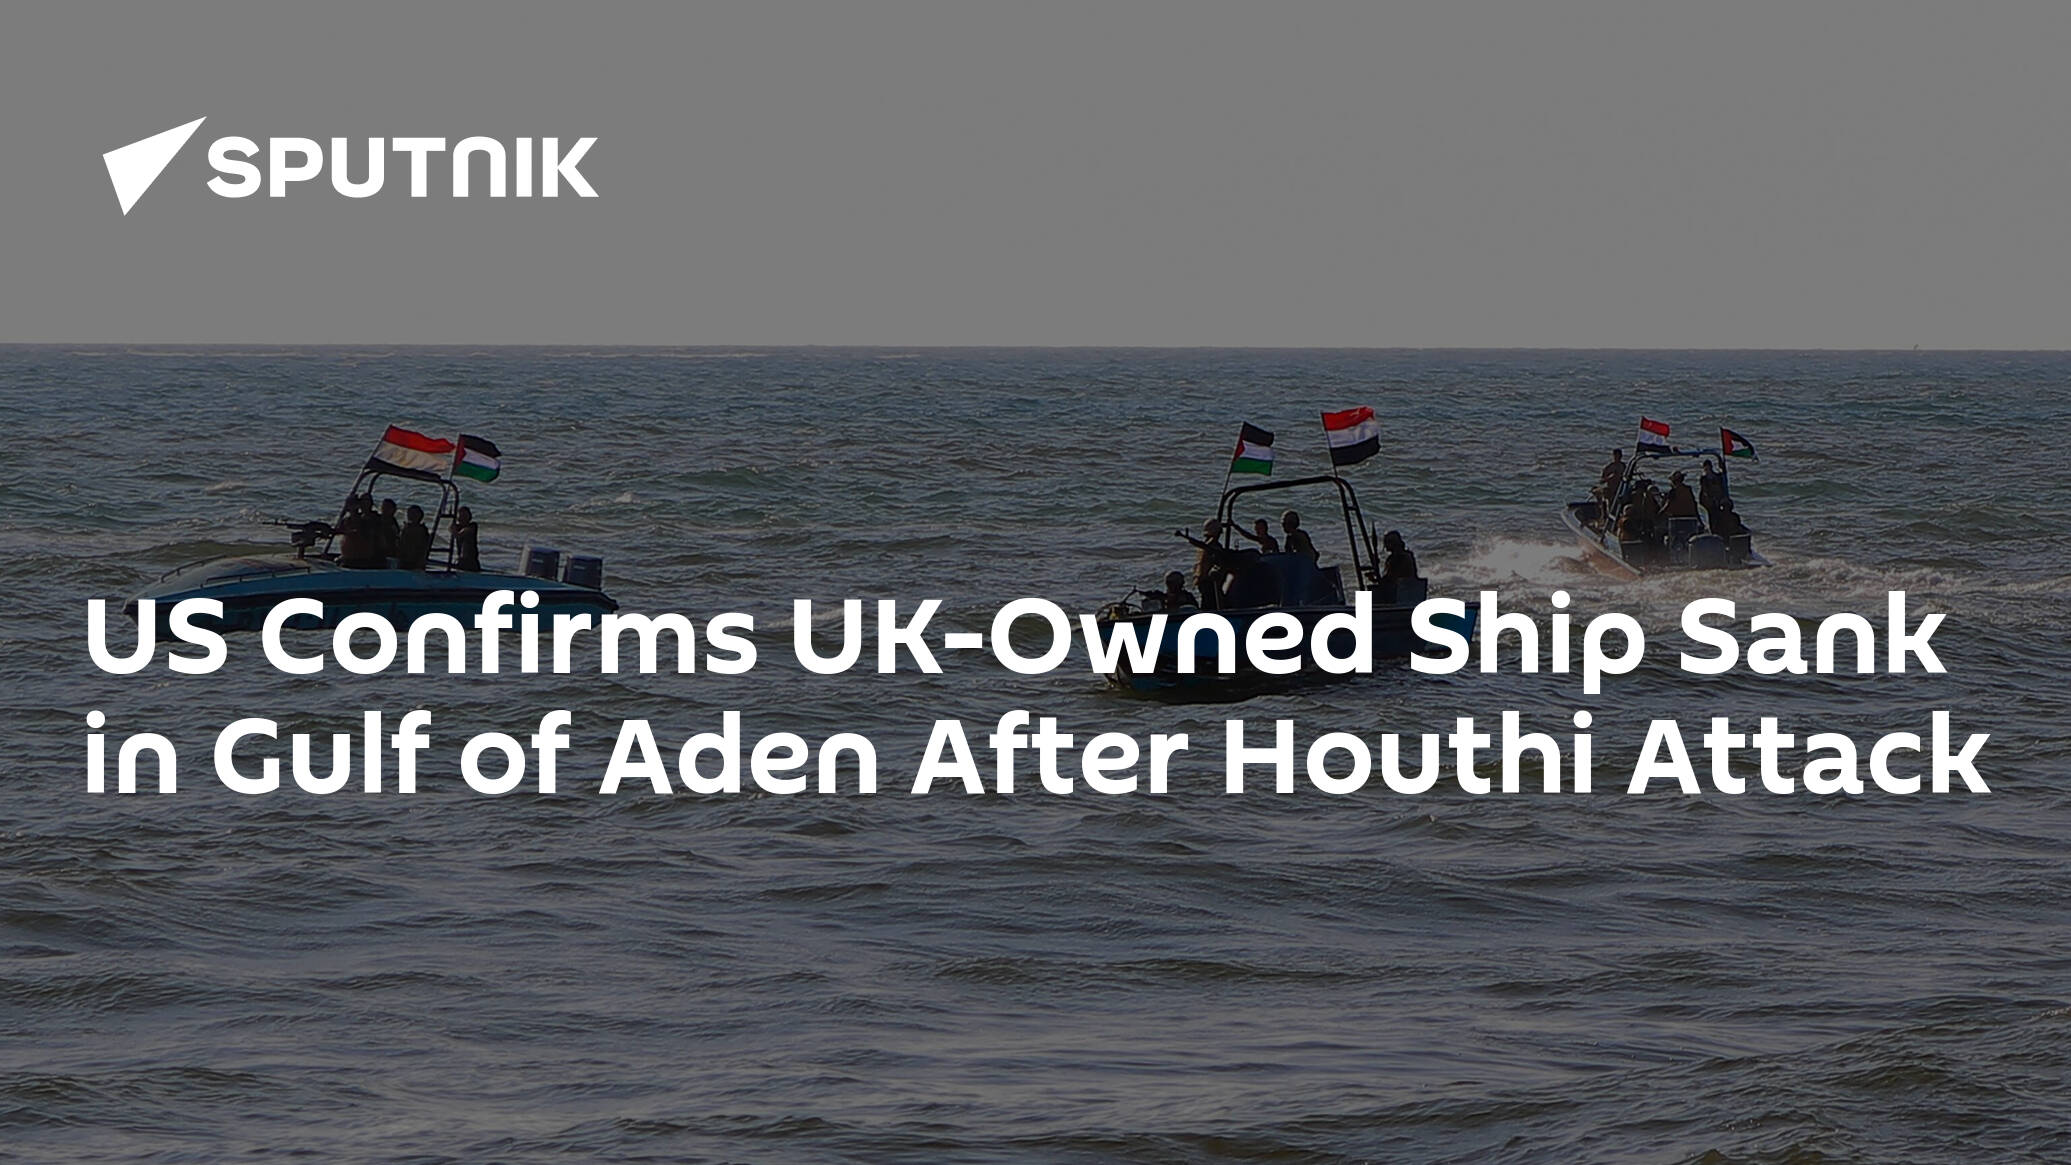 US Confirms UK-Owned Ship Sank in Gulf of Aden After Houthi Attack